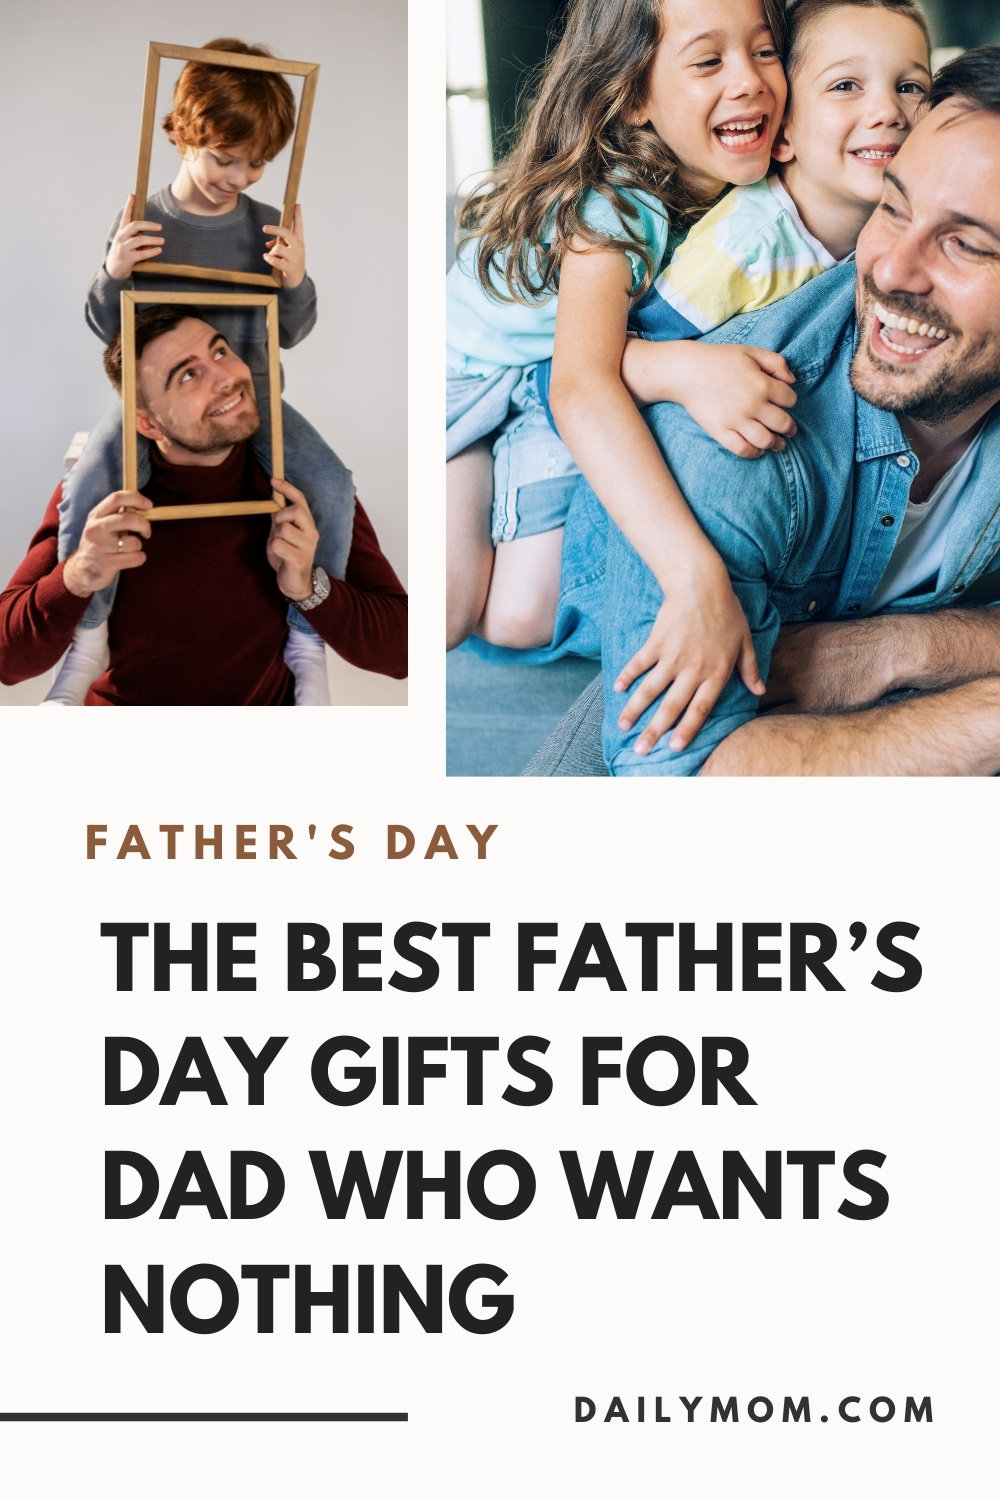 12 Of The Best Father’s Day Gifts For Dad Who Wants Nothing